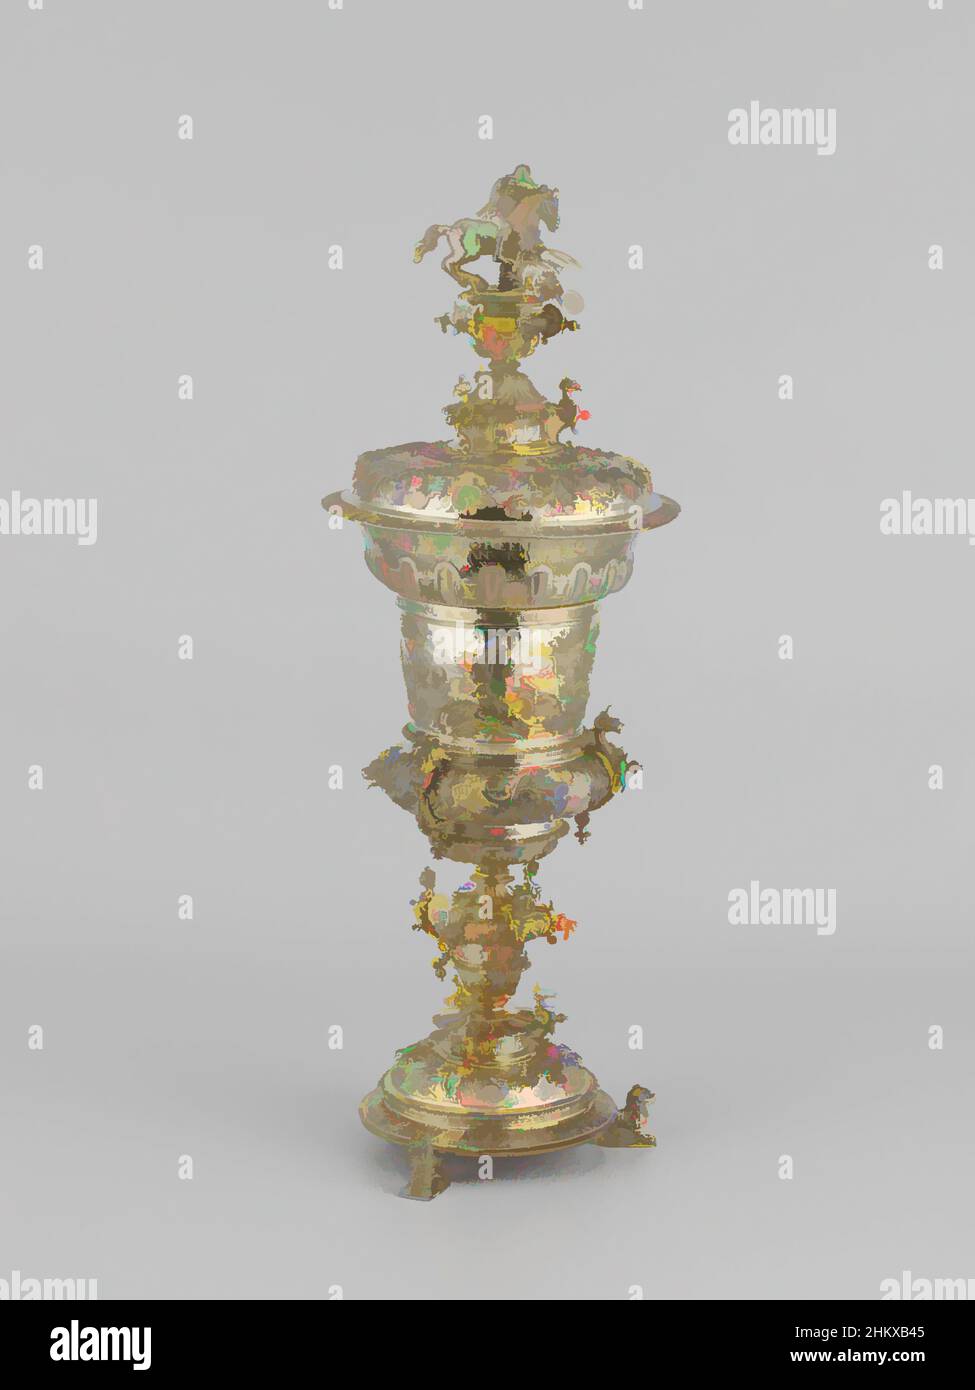 Art inspired by Two lidded cups, Goblet with lid, of the St. Joris marksmen's guild at Gorinchem, Gilt cup with lid. The cup is composed of separate parts, connected by screws. The goblet consists of the following parts; a: Round foot, resting on three seated lions. The edge of the foot, Classic works modernized by Artotop with a splash of modernity. Shapes, color and value, eye-catching visual impact on art. Emotions through freedom of artworks in a contemporary way. A timeless message pursuing a wildly creative new direction. Artists turning to the digital medium and creating the Artotop NFT Stock Photo